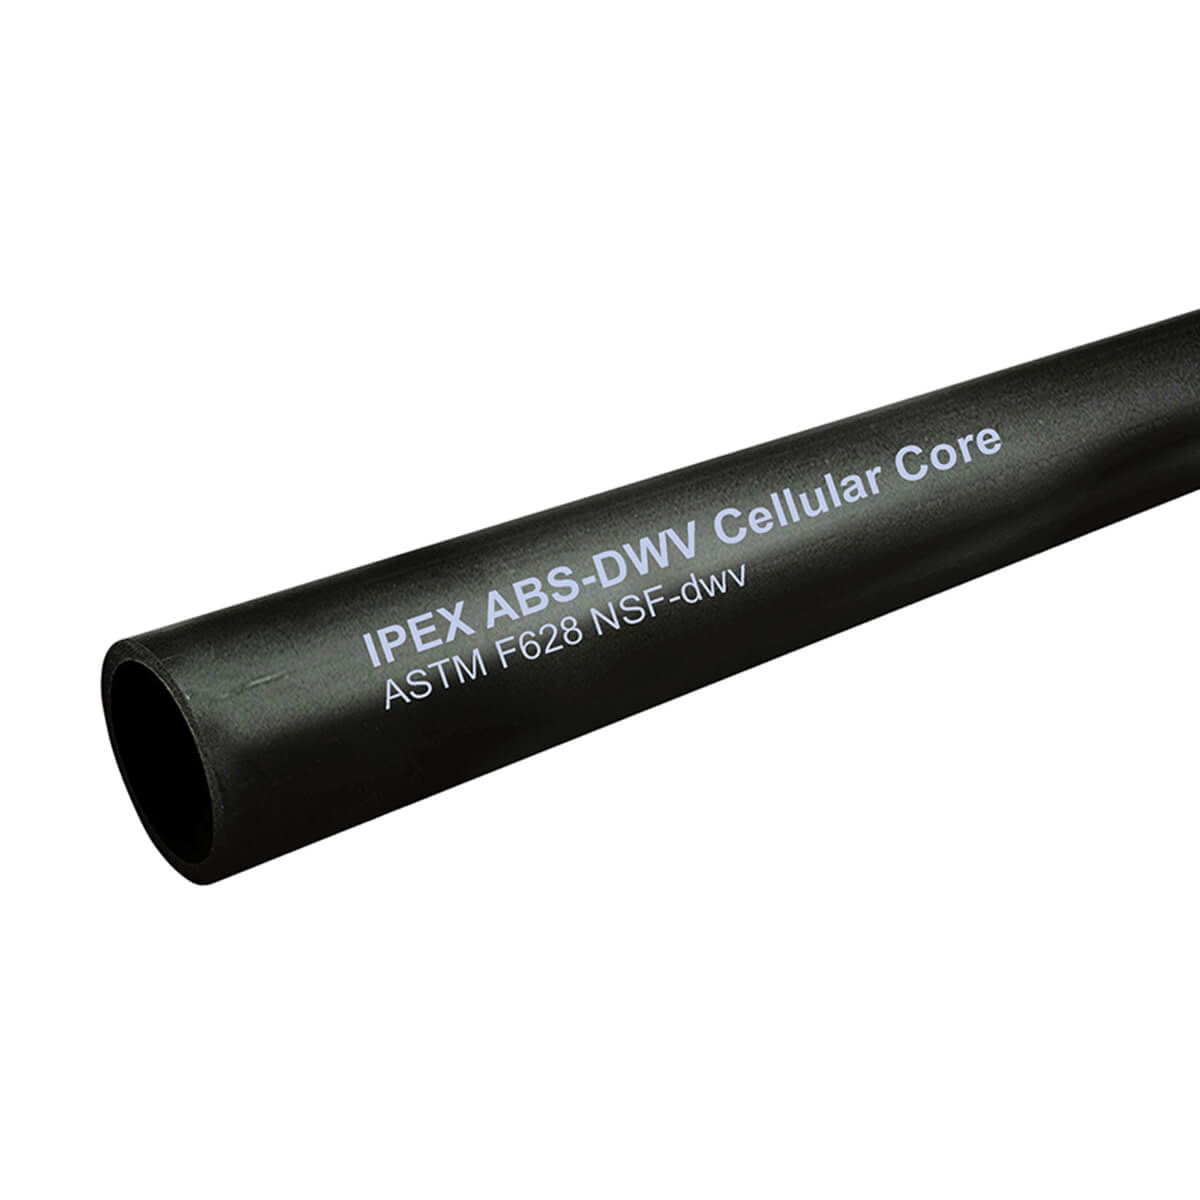 Cell Core Pipe - ABS-DWV - 2-in x 6-ft